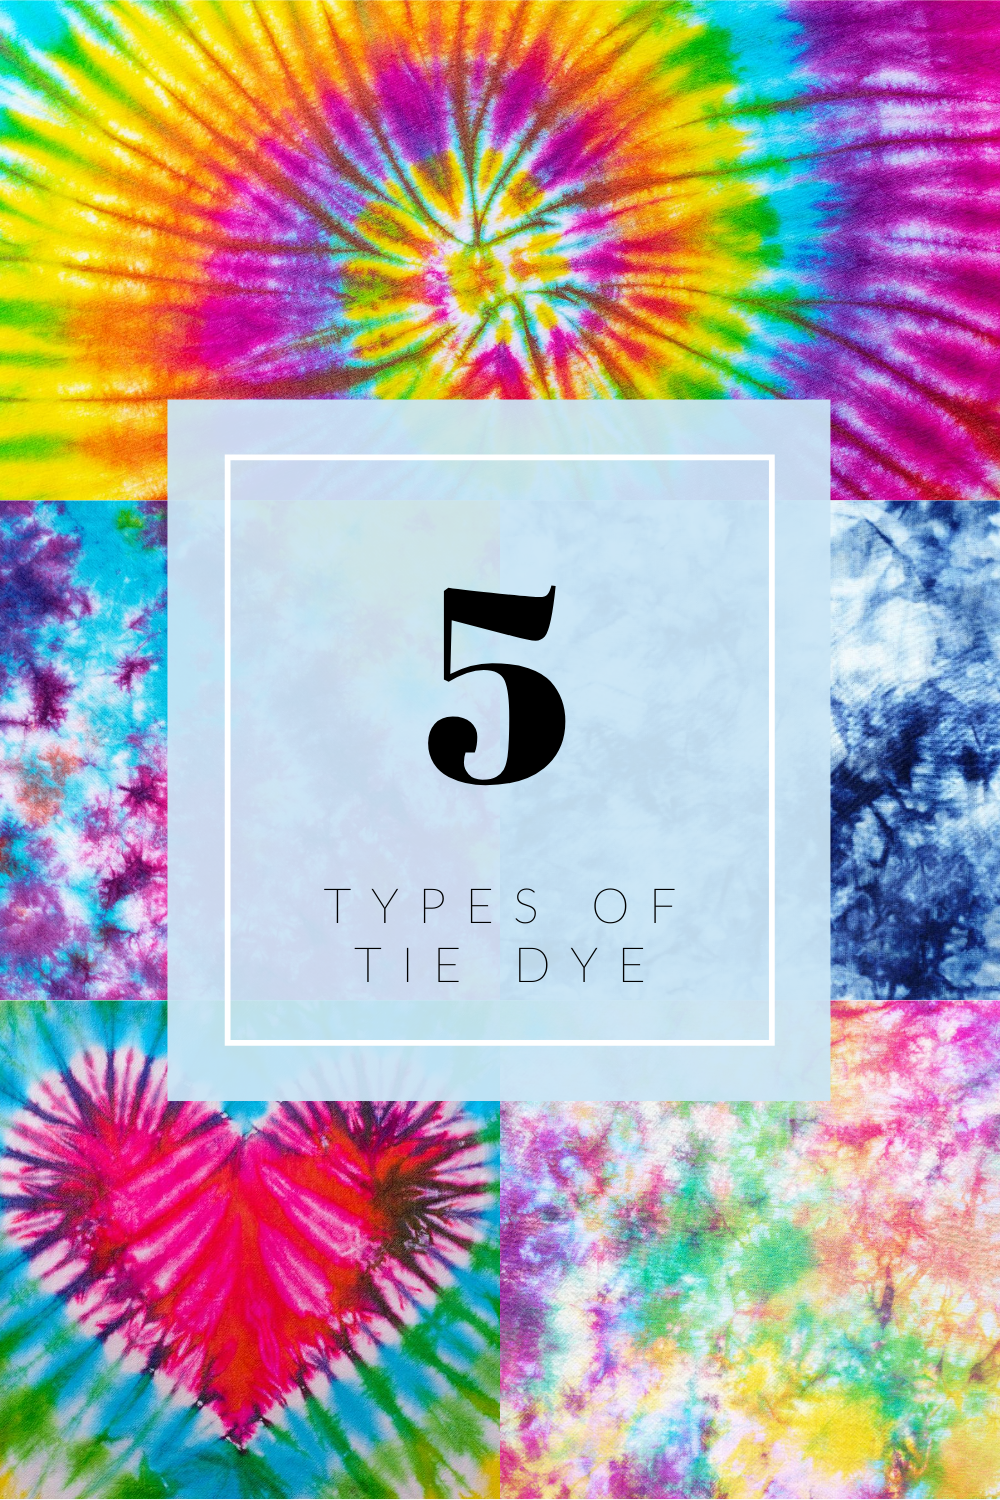 DIY: Pink Tie Dye Shirt or How I Turned My Failed DIY Into Successful One -  Why Buy? DIY!